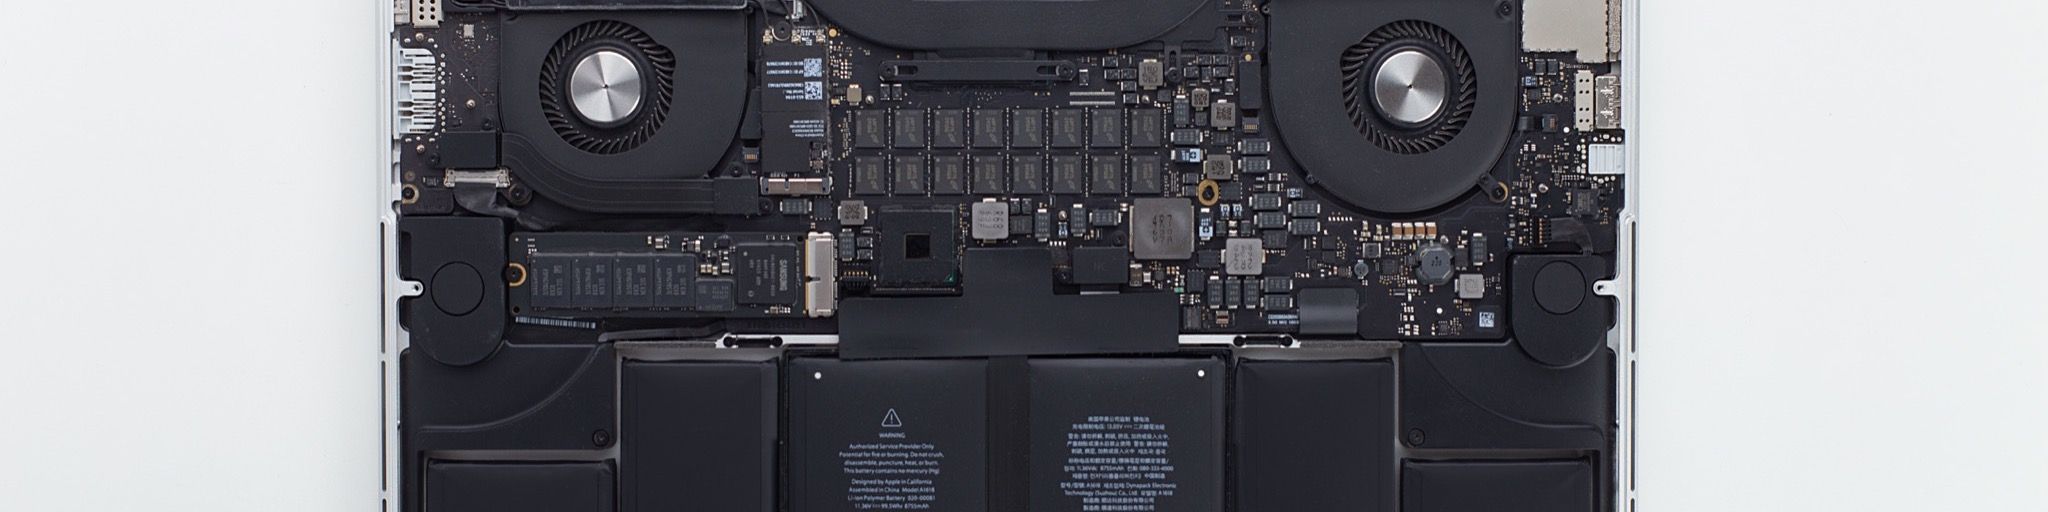 The insides of your laptop